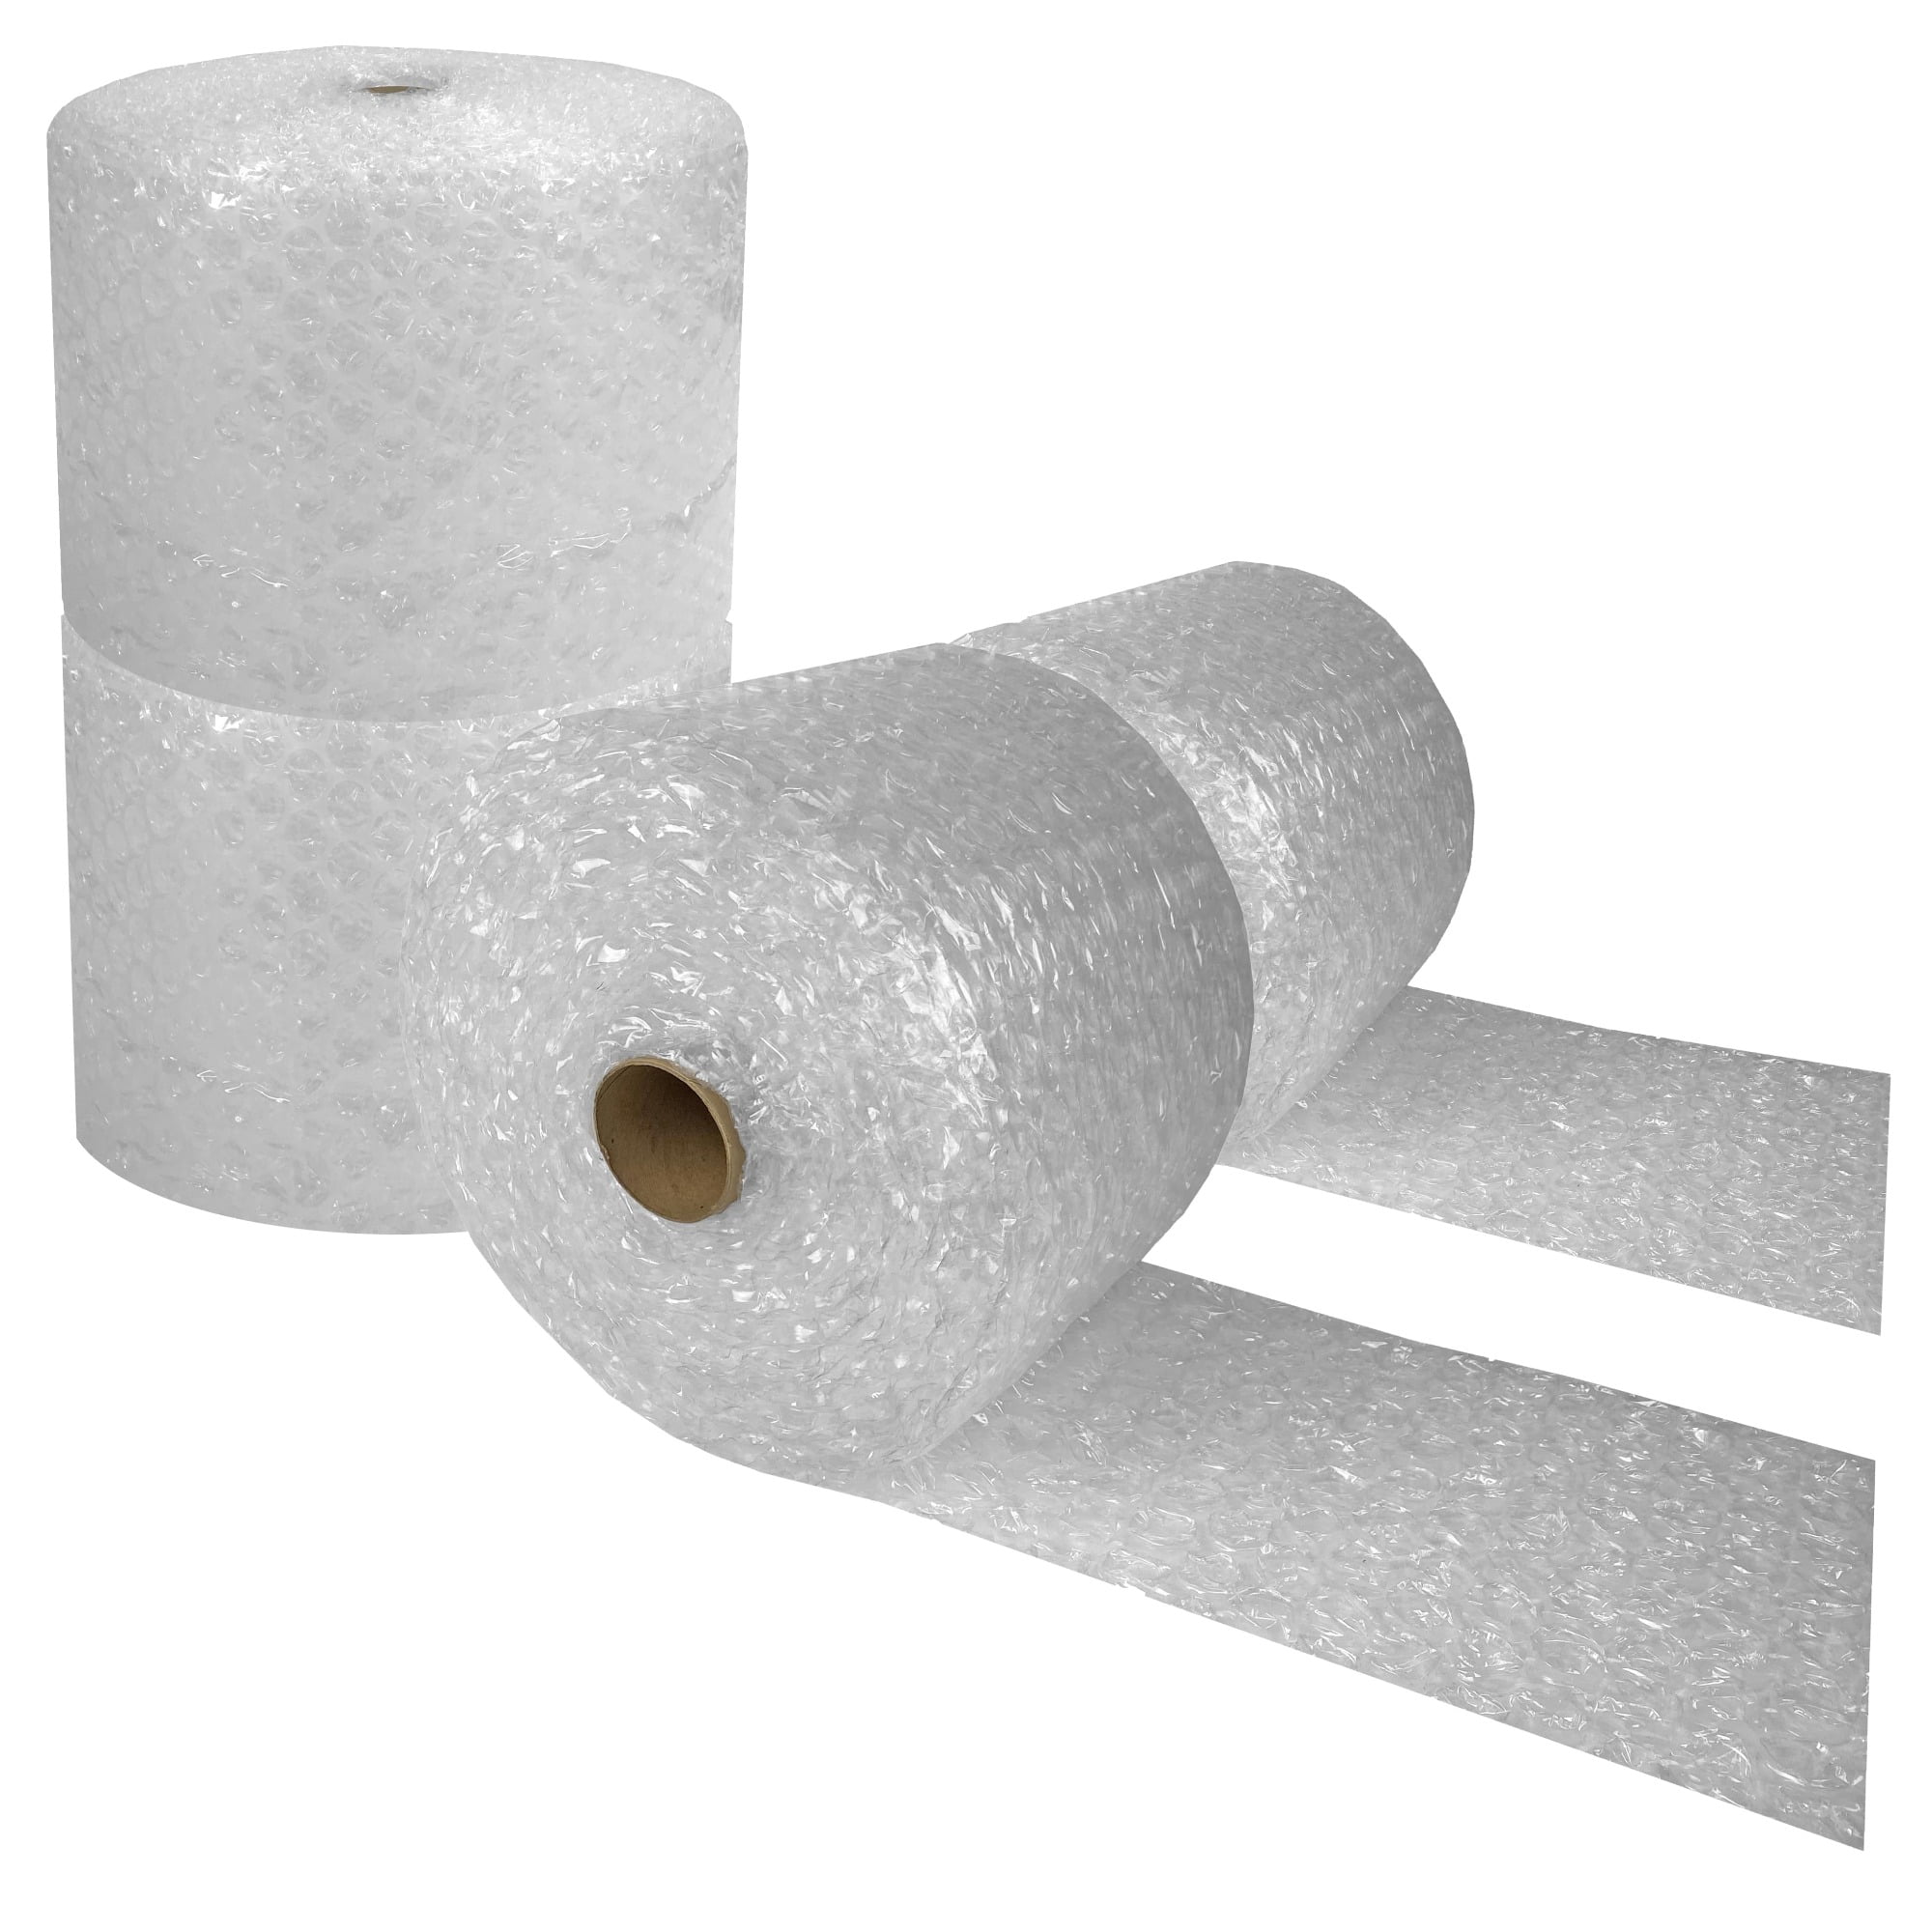 x 12" Perforated Every 12" US Bubble Cushioning Wrap Small Padding 3/16" 700 ft 